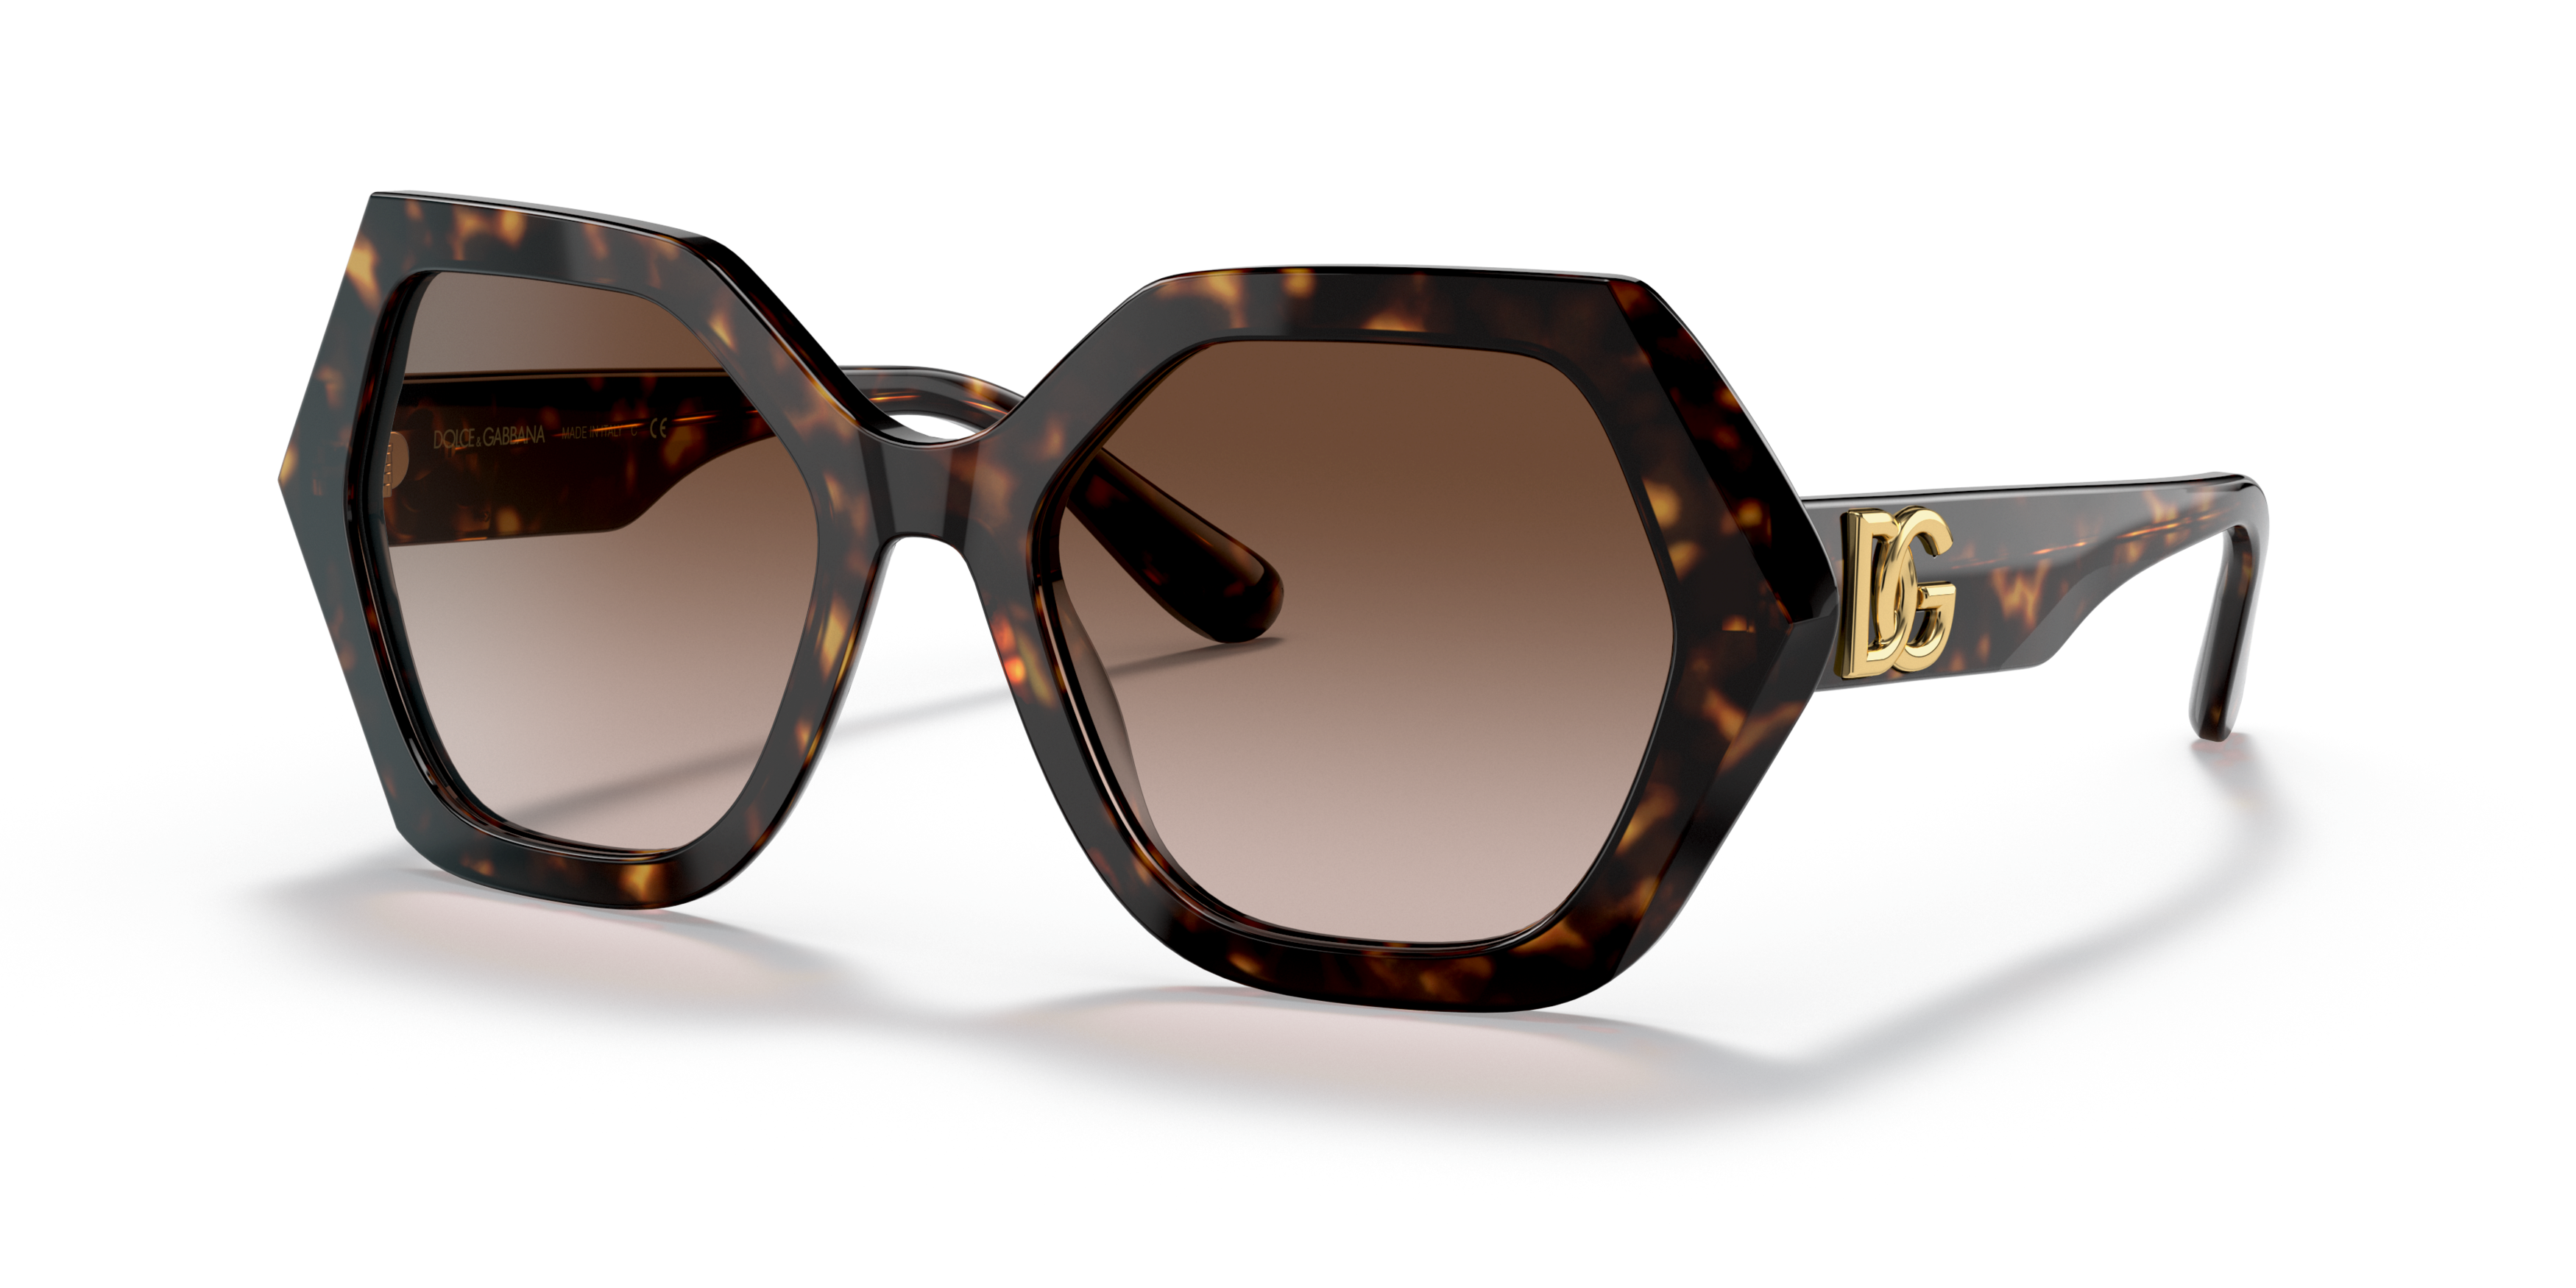 [products.image.angle_left01] DOLCE & GABBANA DG4406 502/13